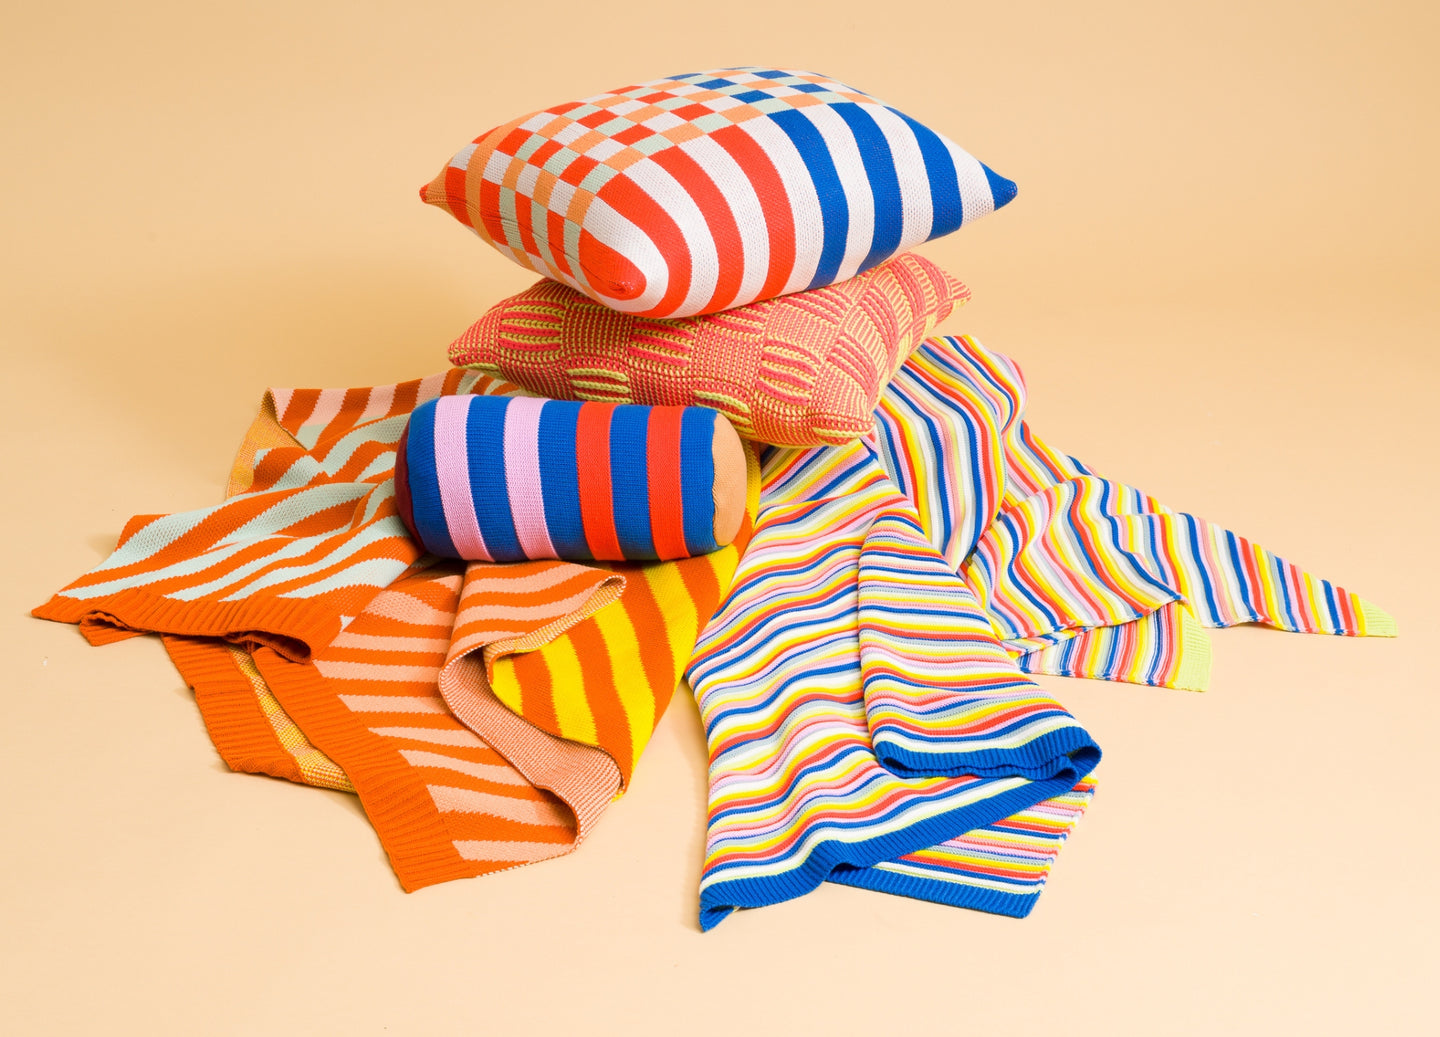 pile of colorful knit pillows and throws in graphic striped motifs